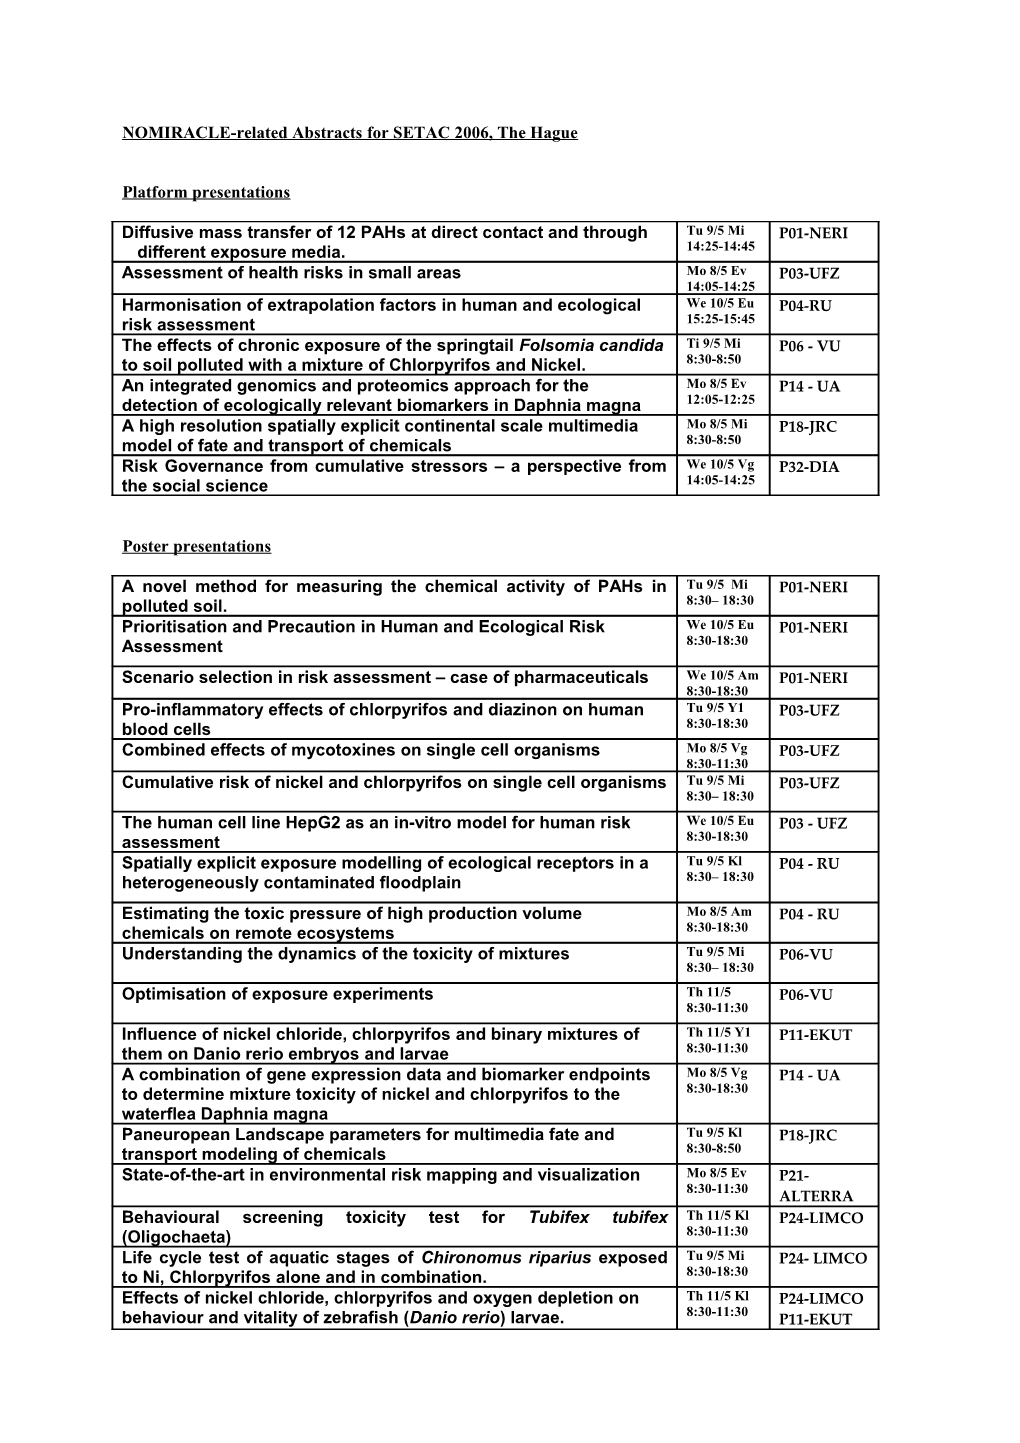 NOMIRACLE-Related Abstracts for SETAC 2006, Den Hague